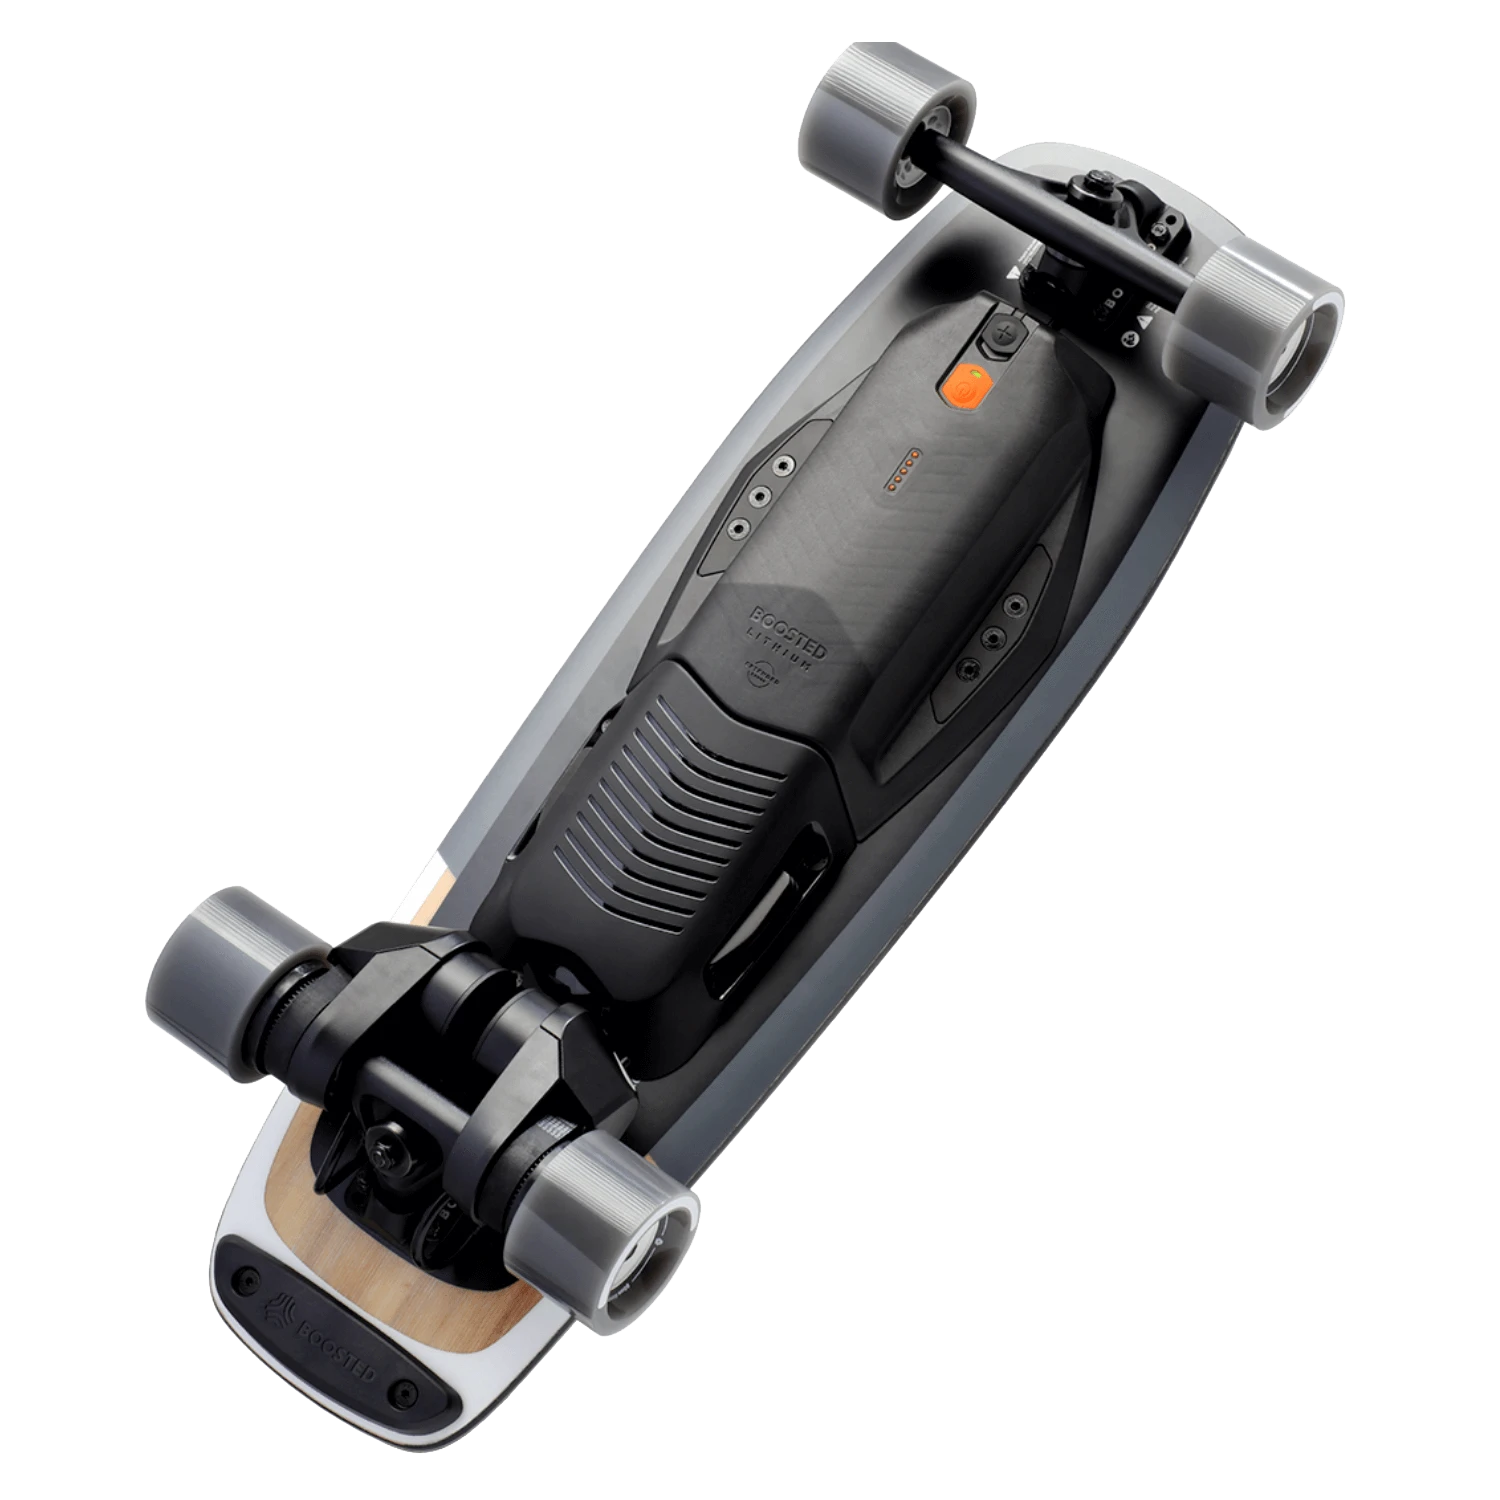 product named boosted mini x in electric skateboards